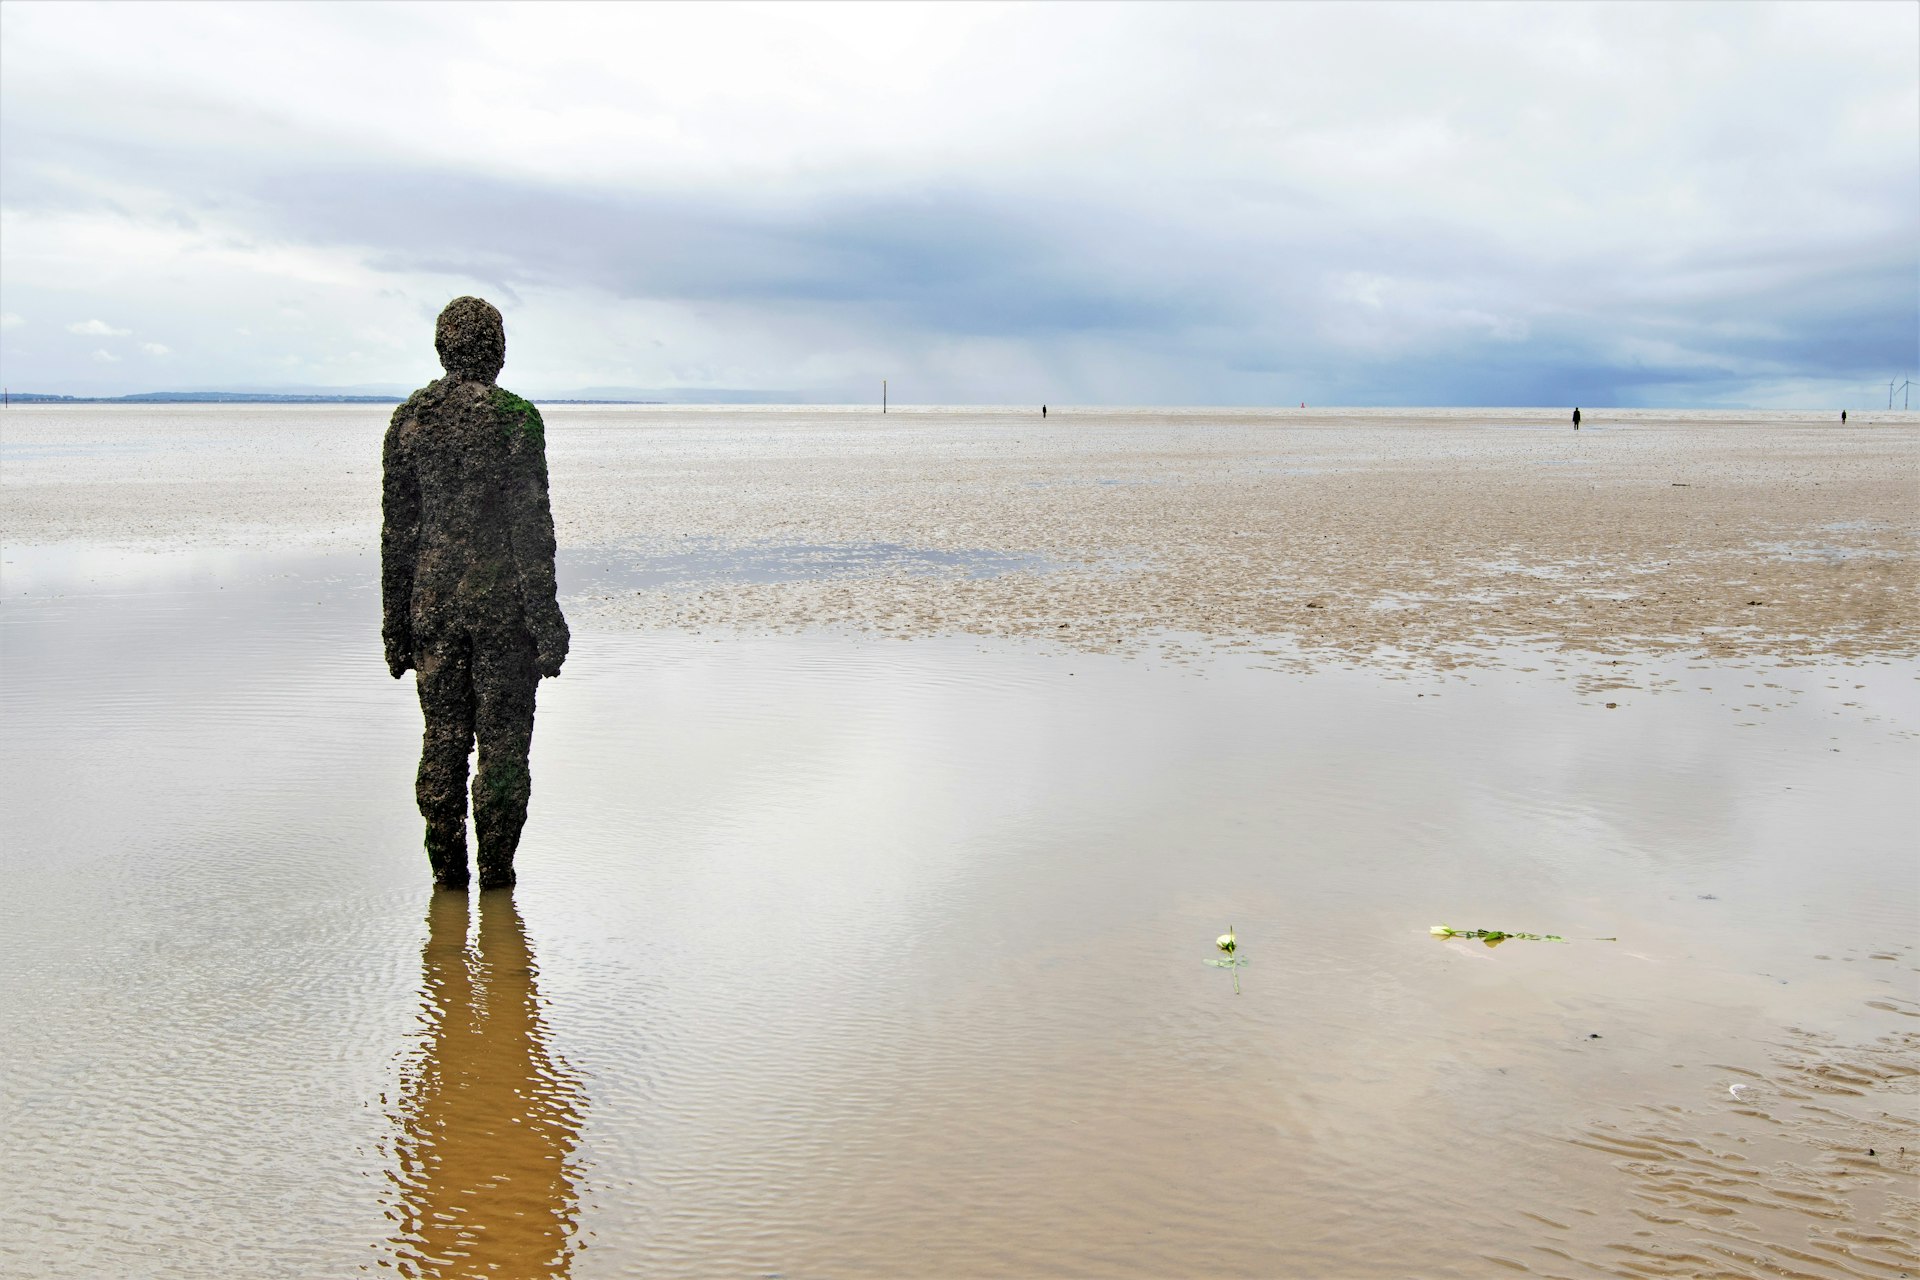 Statues called 'Another Place' by Anthony Gormley, now a permanent feature at Crosby Beach.